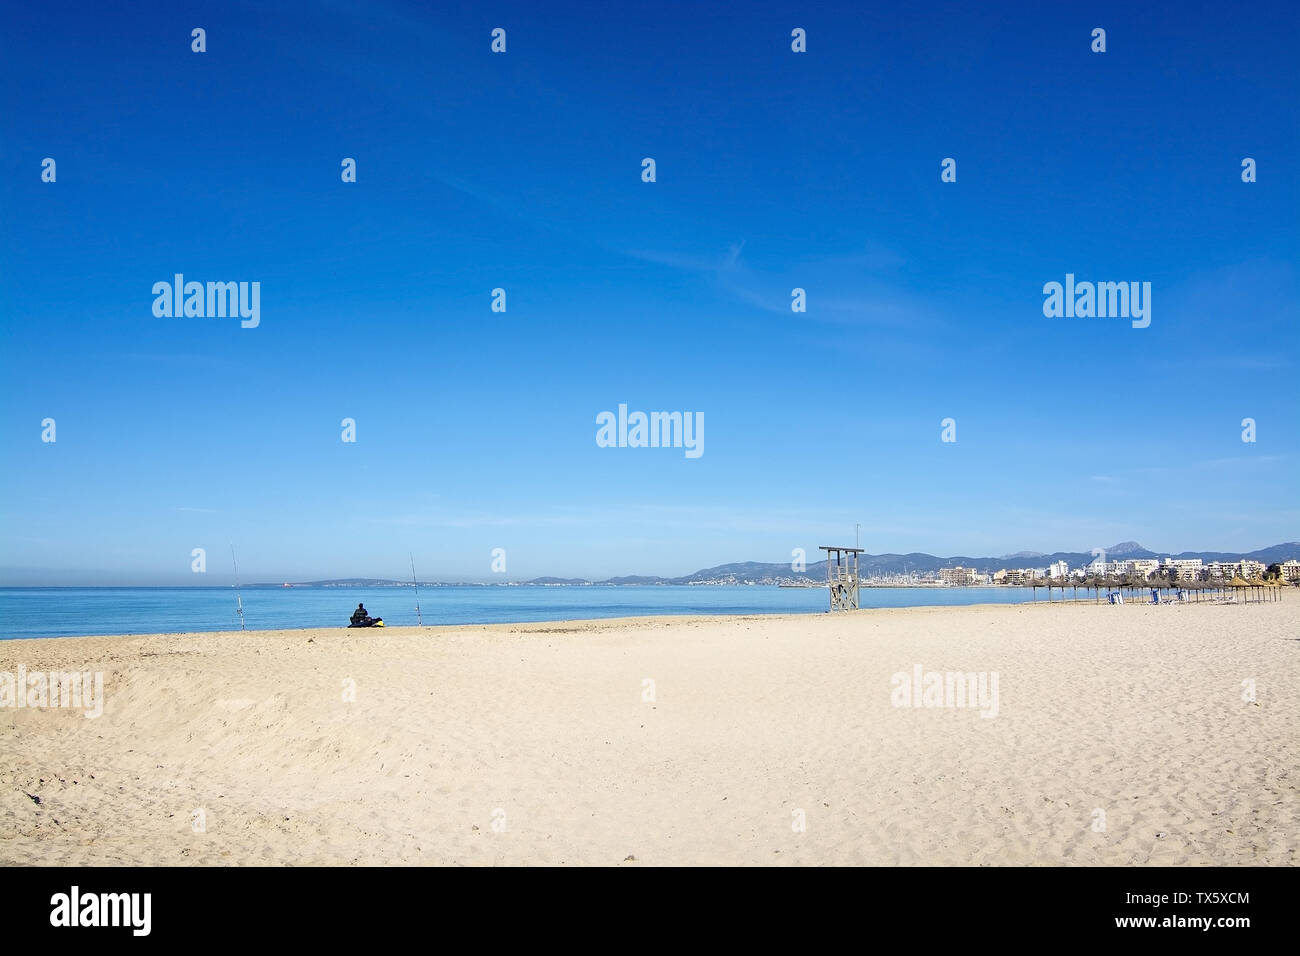 PALMA, MALLORCA, SPAIN - MAY 1, 2019: Man fishing from a sandy beach with life guard tower and blue sky on May 1, 2019 in Palma, Mallorca, Spain. Stock Photo